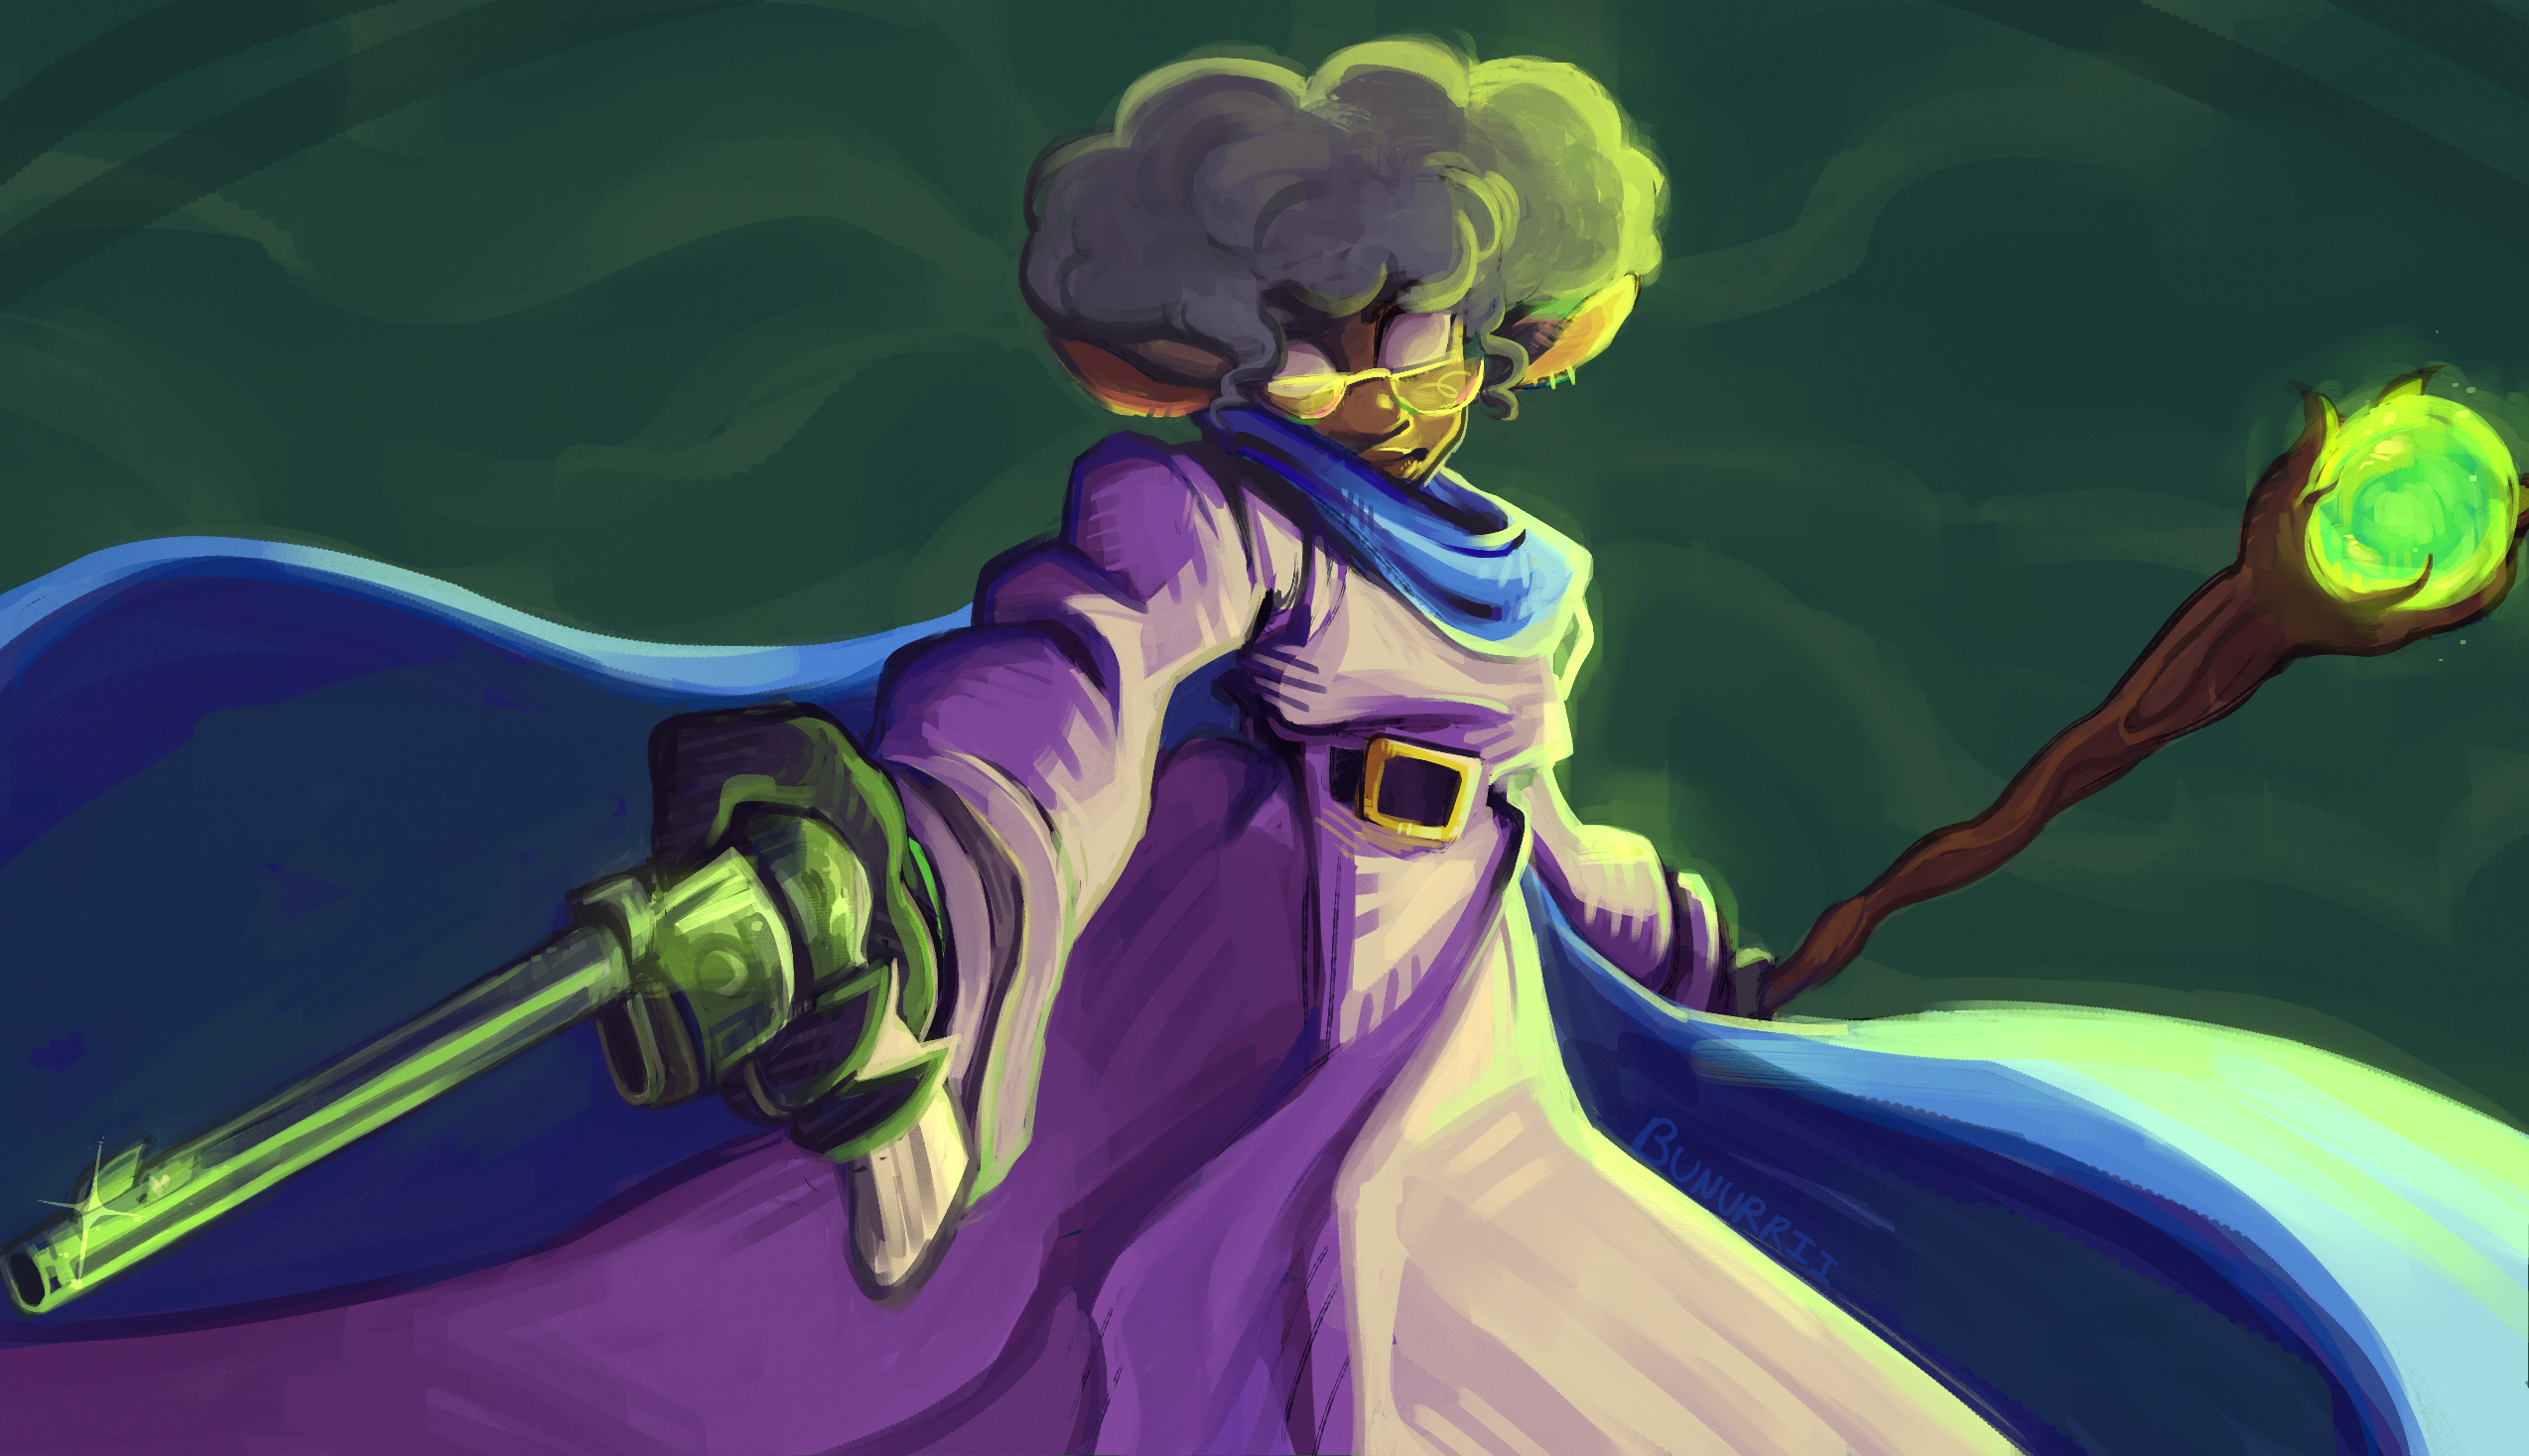 An anthropomorphic sheep clad in flowing purple robes of royalty, wielding a wooden staff who's tip is beset with a large green orb. Eyes pupil-less, they stare down from the would-be perspective of one of the last symbols, that lay low. And staring up along the barrel of a glinting revolver in the dark light, the sheep's fingers are poised to pull the trigger and end the cycle.